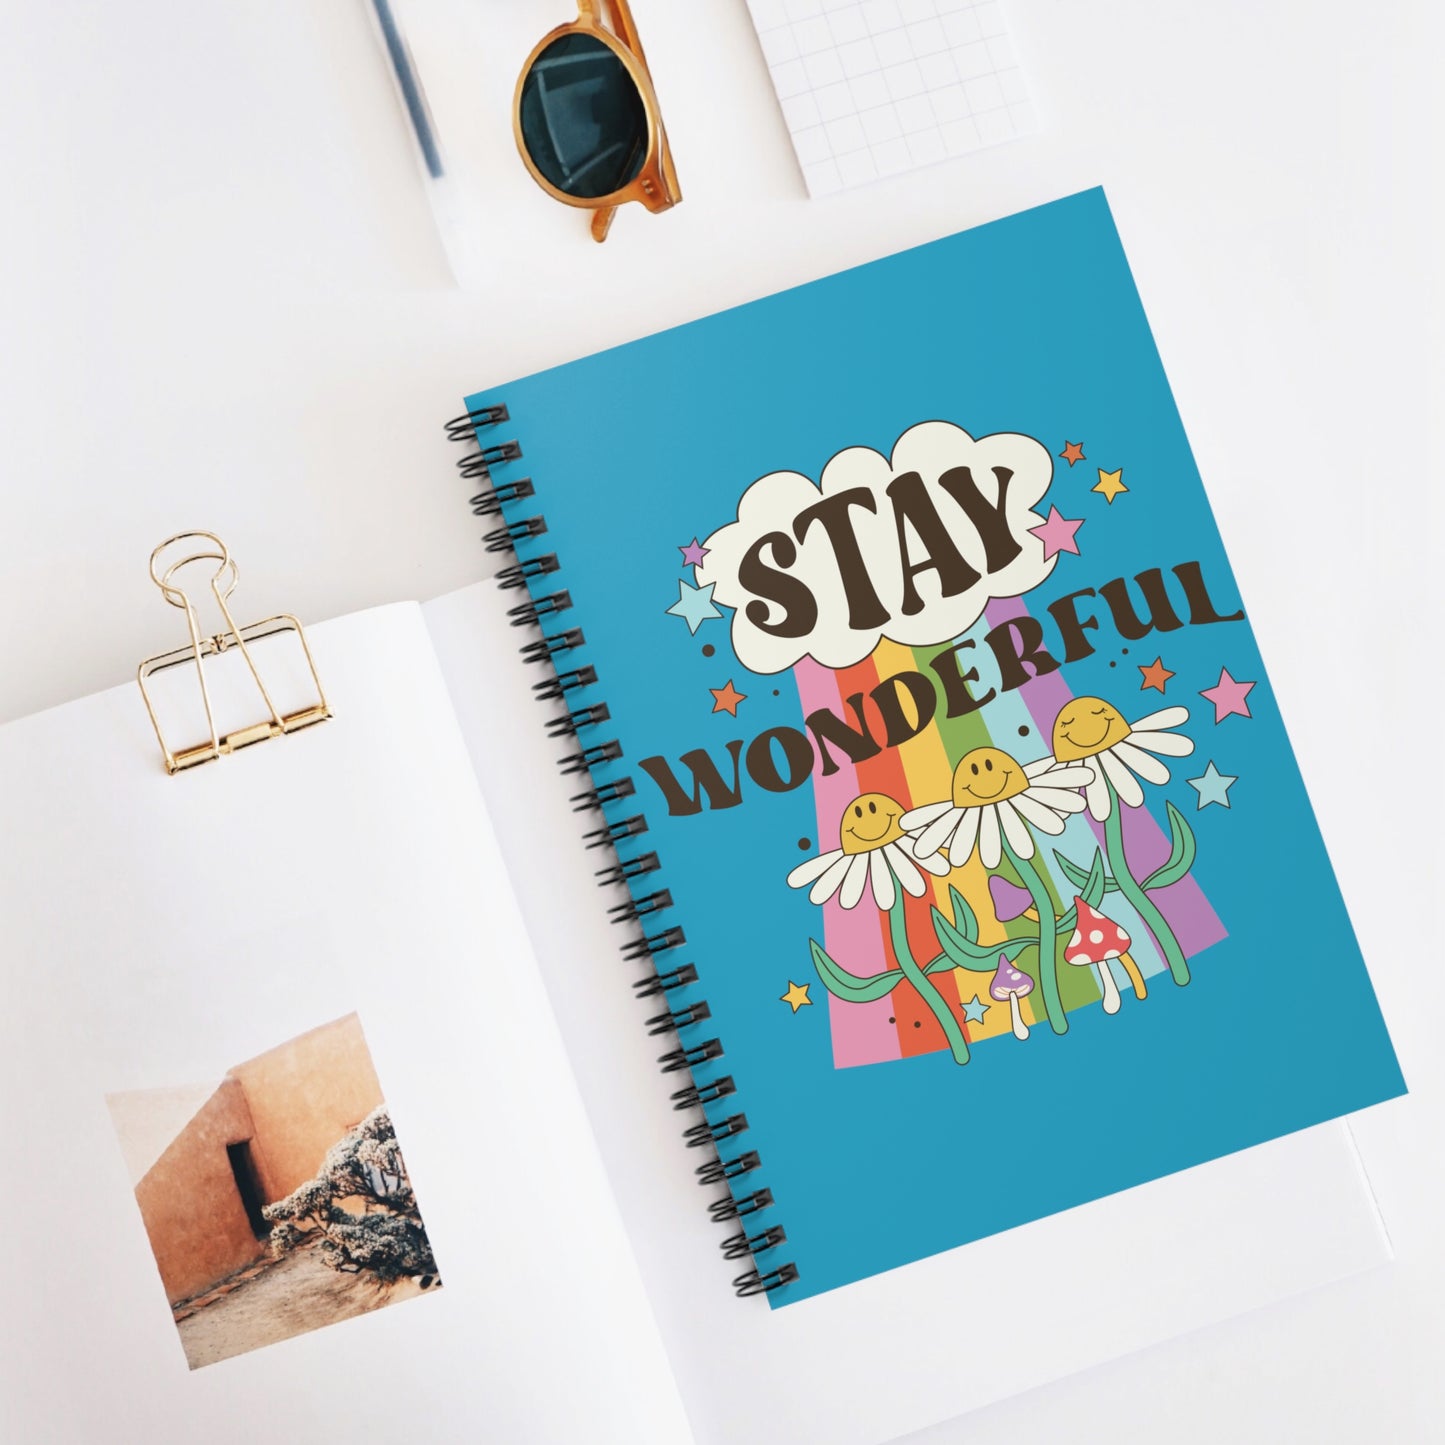 Stay Wonderful: Spiral Notebook - Log Books - Journals - Diaries - and More Custom Printed by TheGlassyLass.com